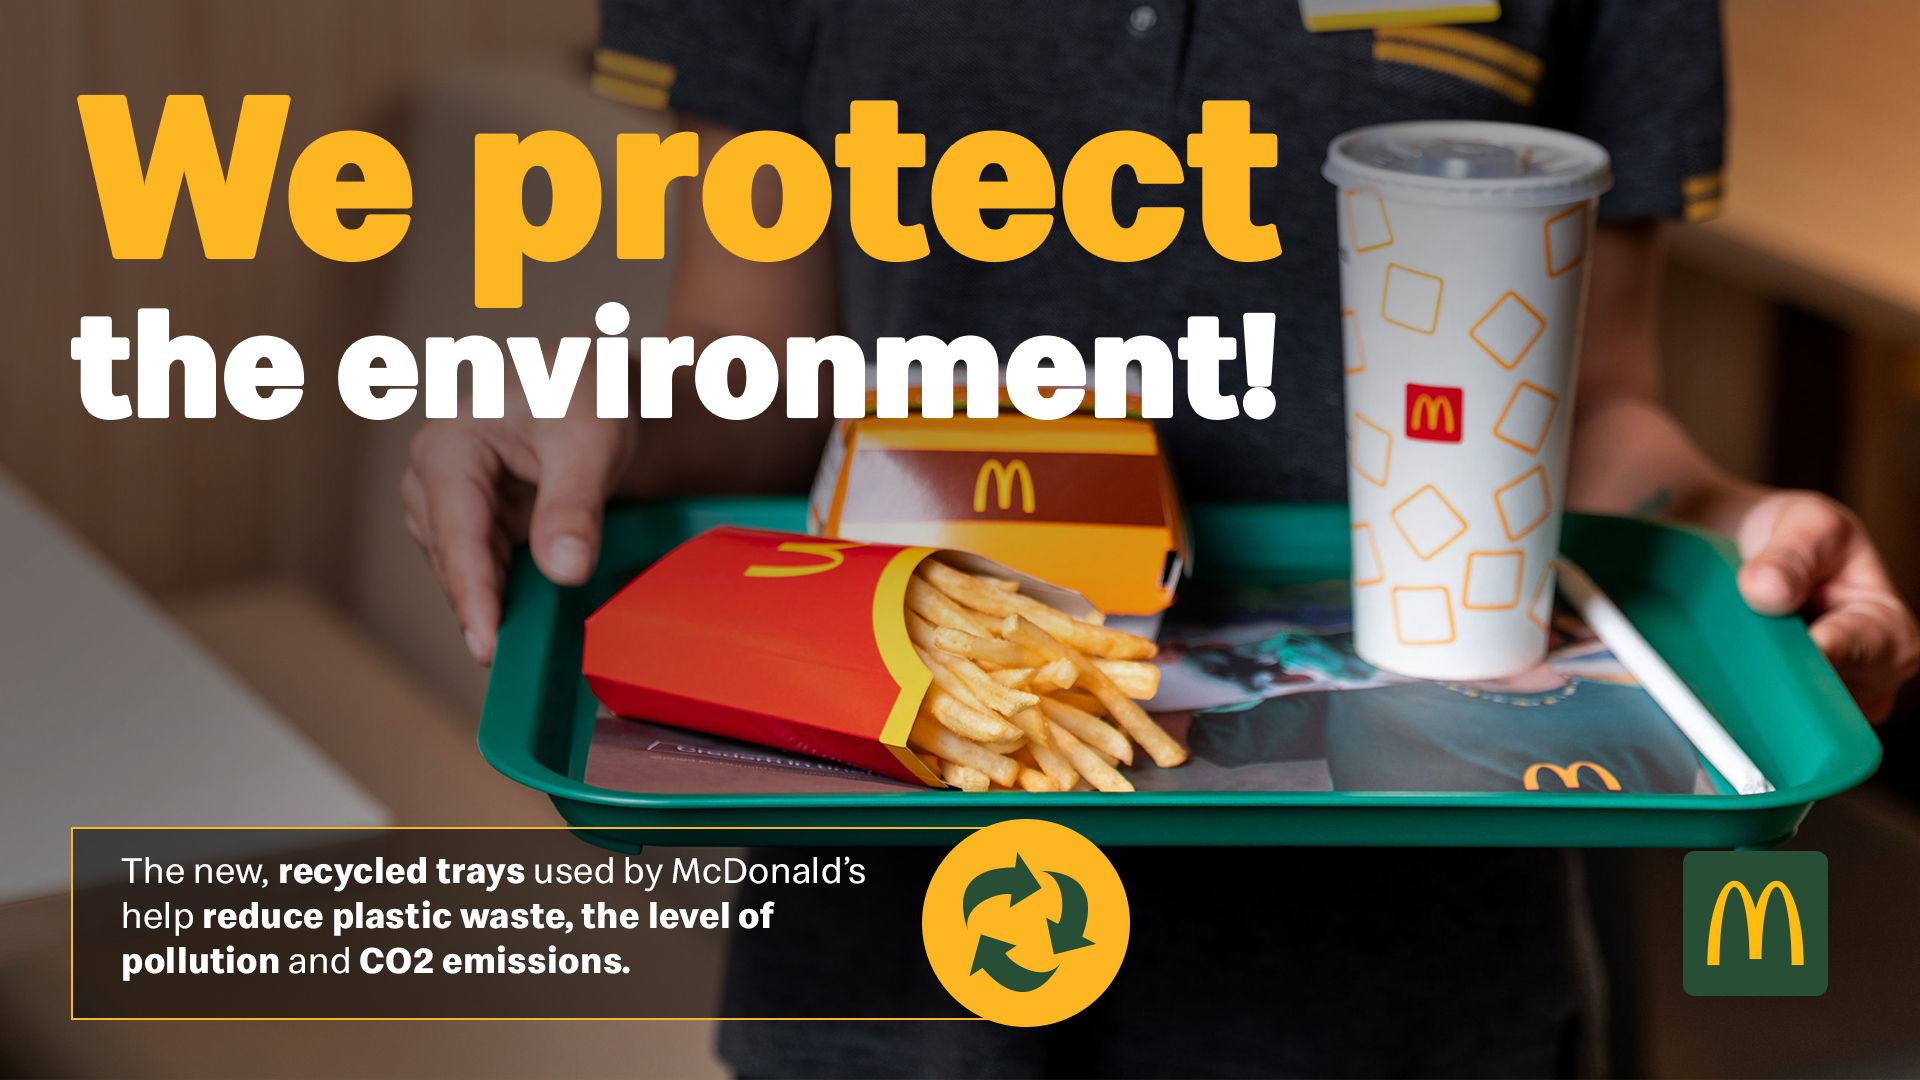 AION's circular plastic trays are introduced as part of McDonald's Romania's ambitions on sustainable packaging.